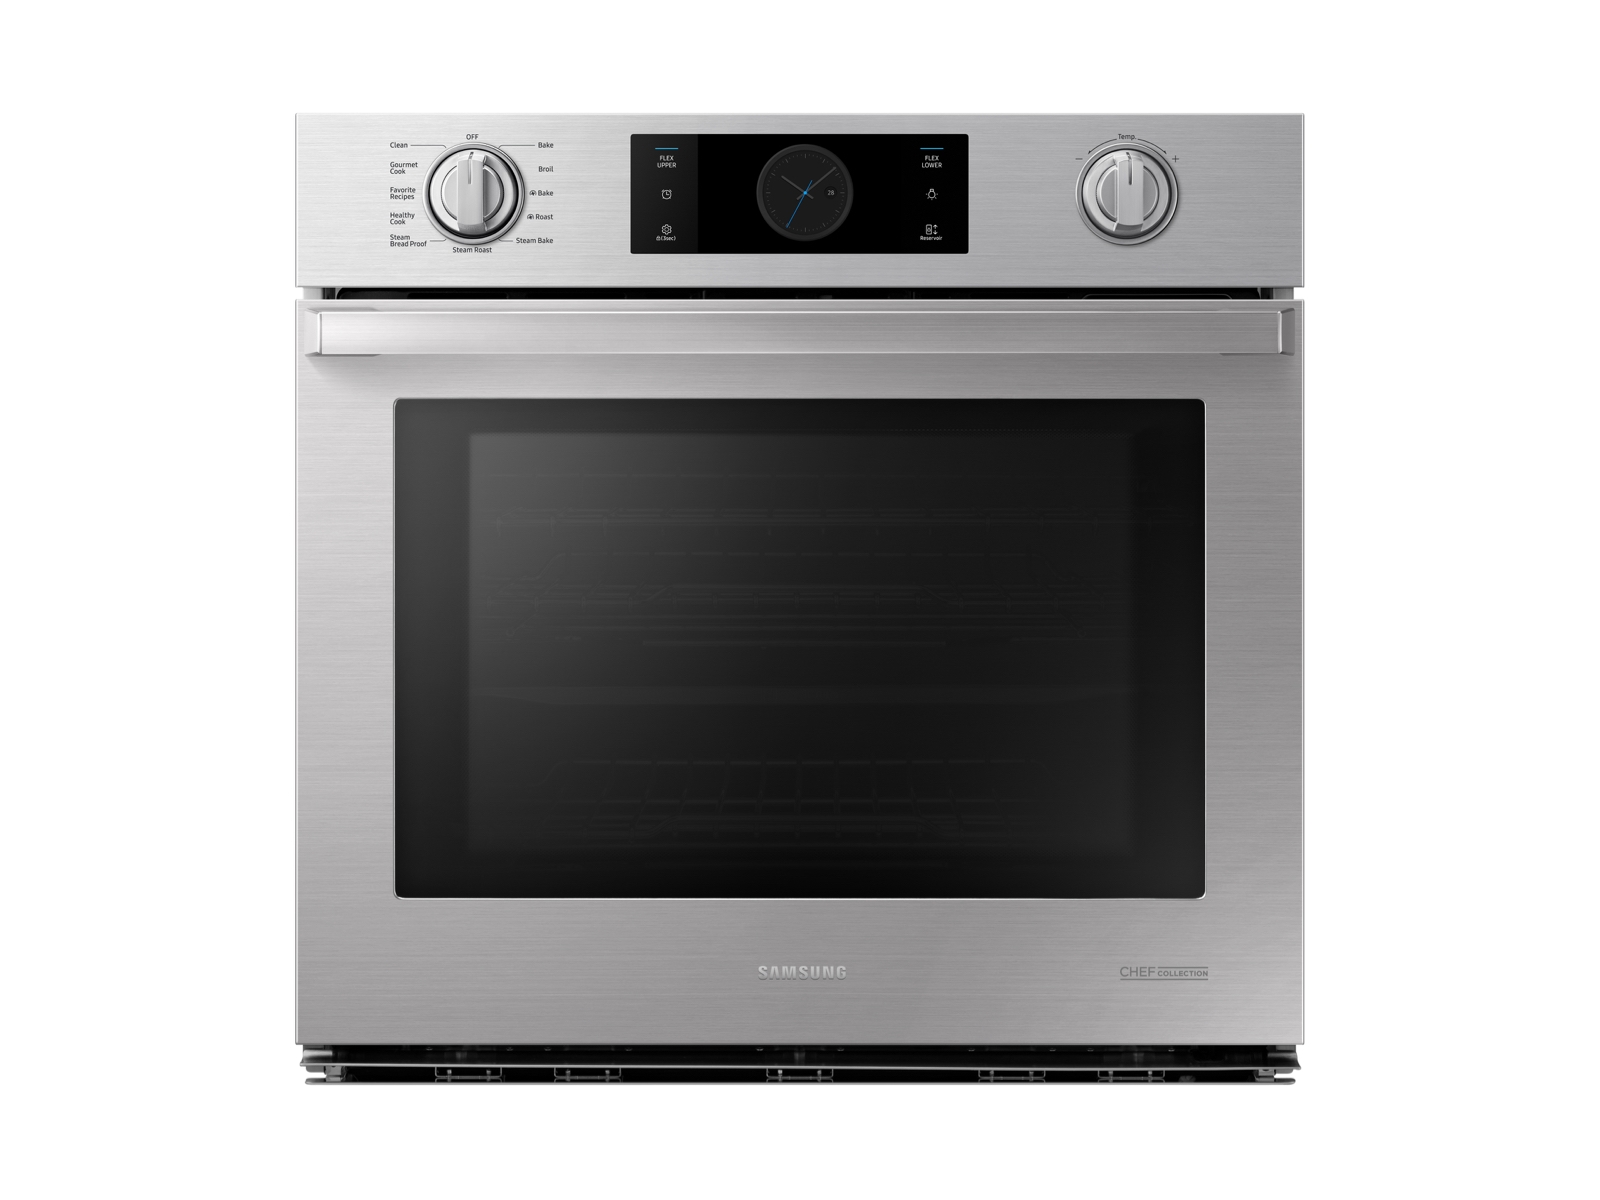 36 inch Induction Chef Collection Cooktop - NZ36M9880UB/AA